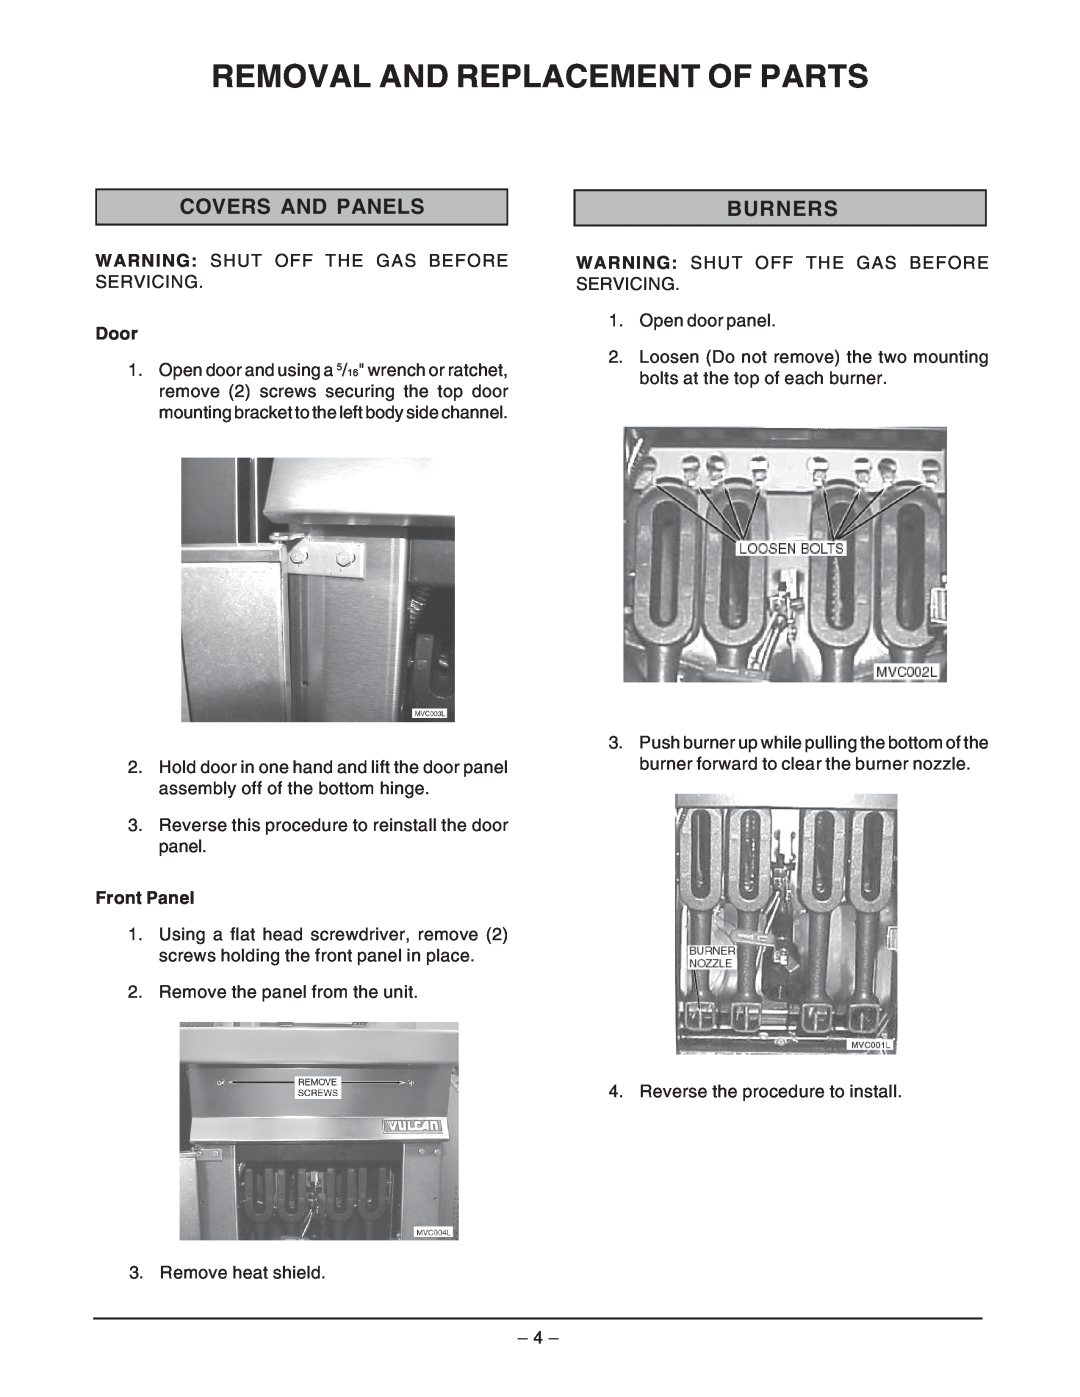 Vulcan-Hart GHF91G ML-135503, GHF90G ML-135504 service manual Removal And Replacement Of Parts, Covers And Panels, Burners 